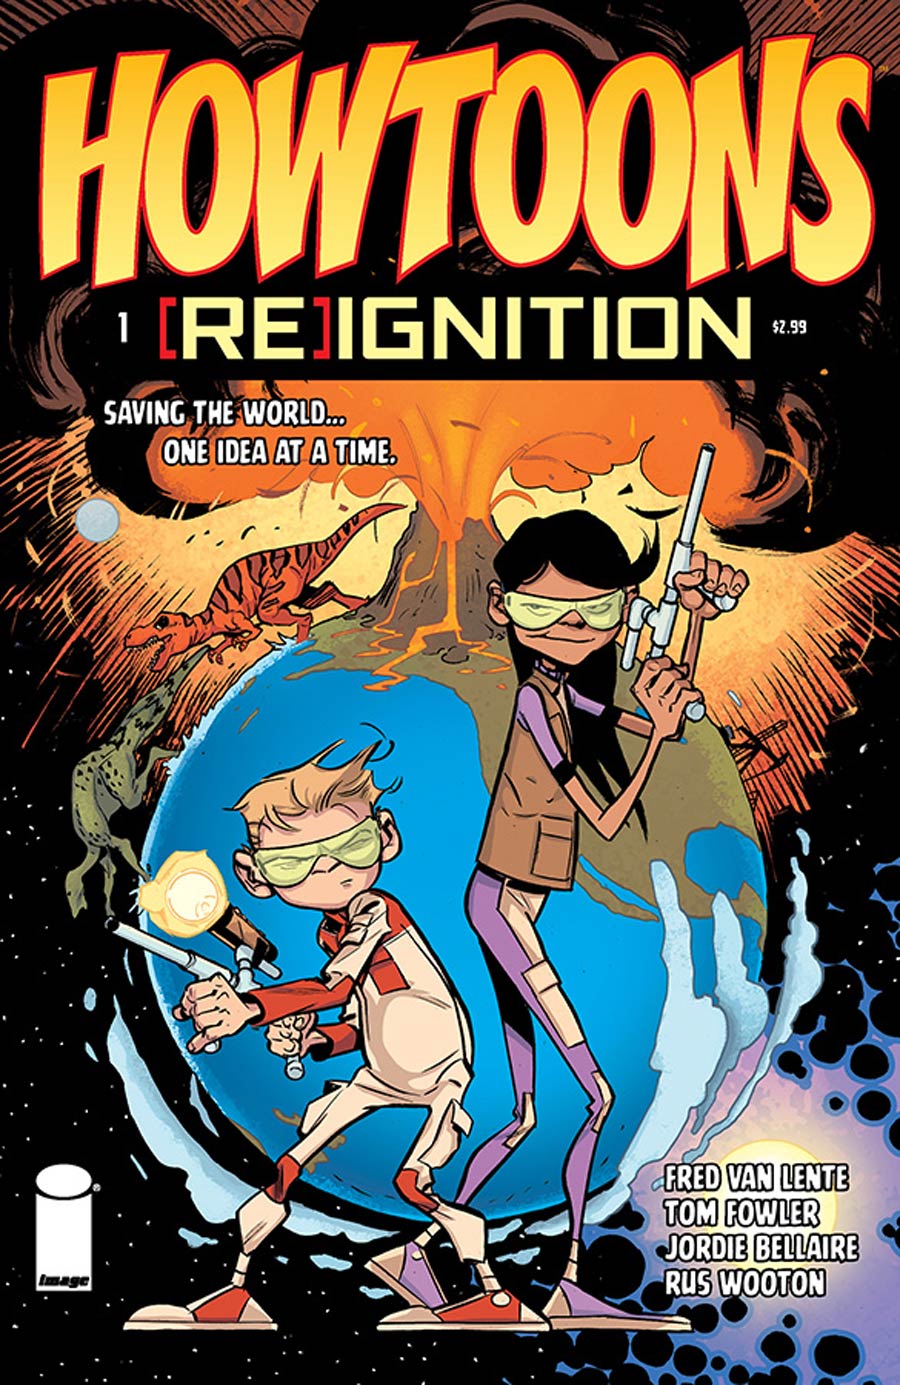 Howtoons (Re)Ignition #1